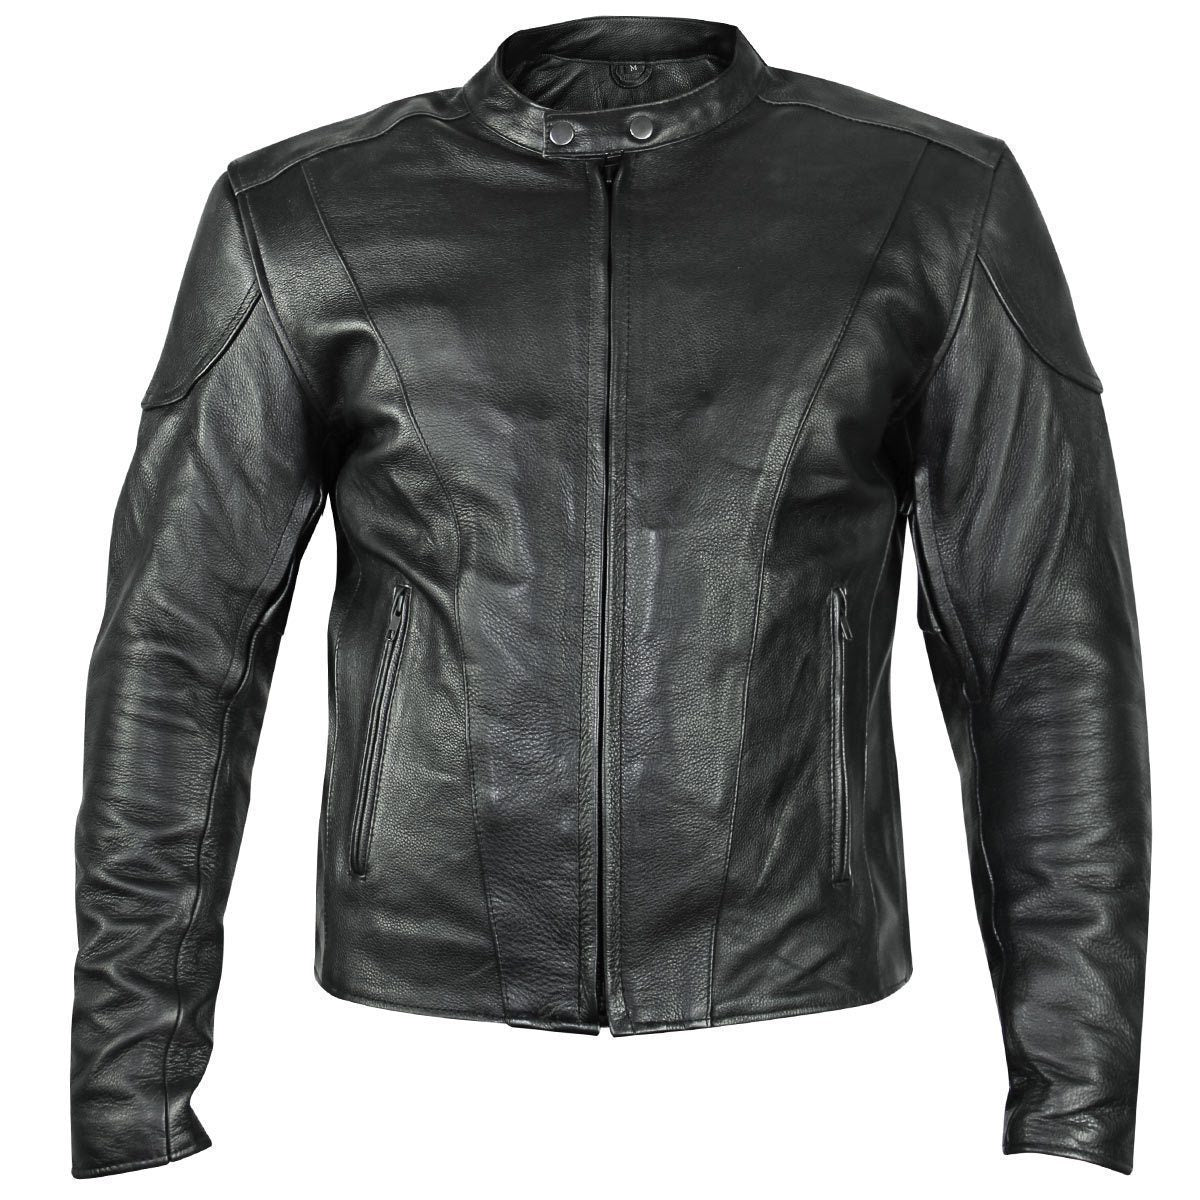 Xelement B7209 Men's 'Renegade' Black Leather Motorcycle Jacket with X ...